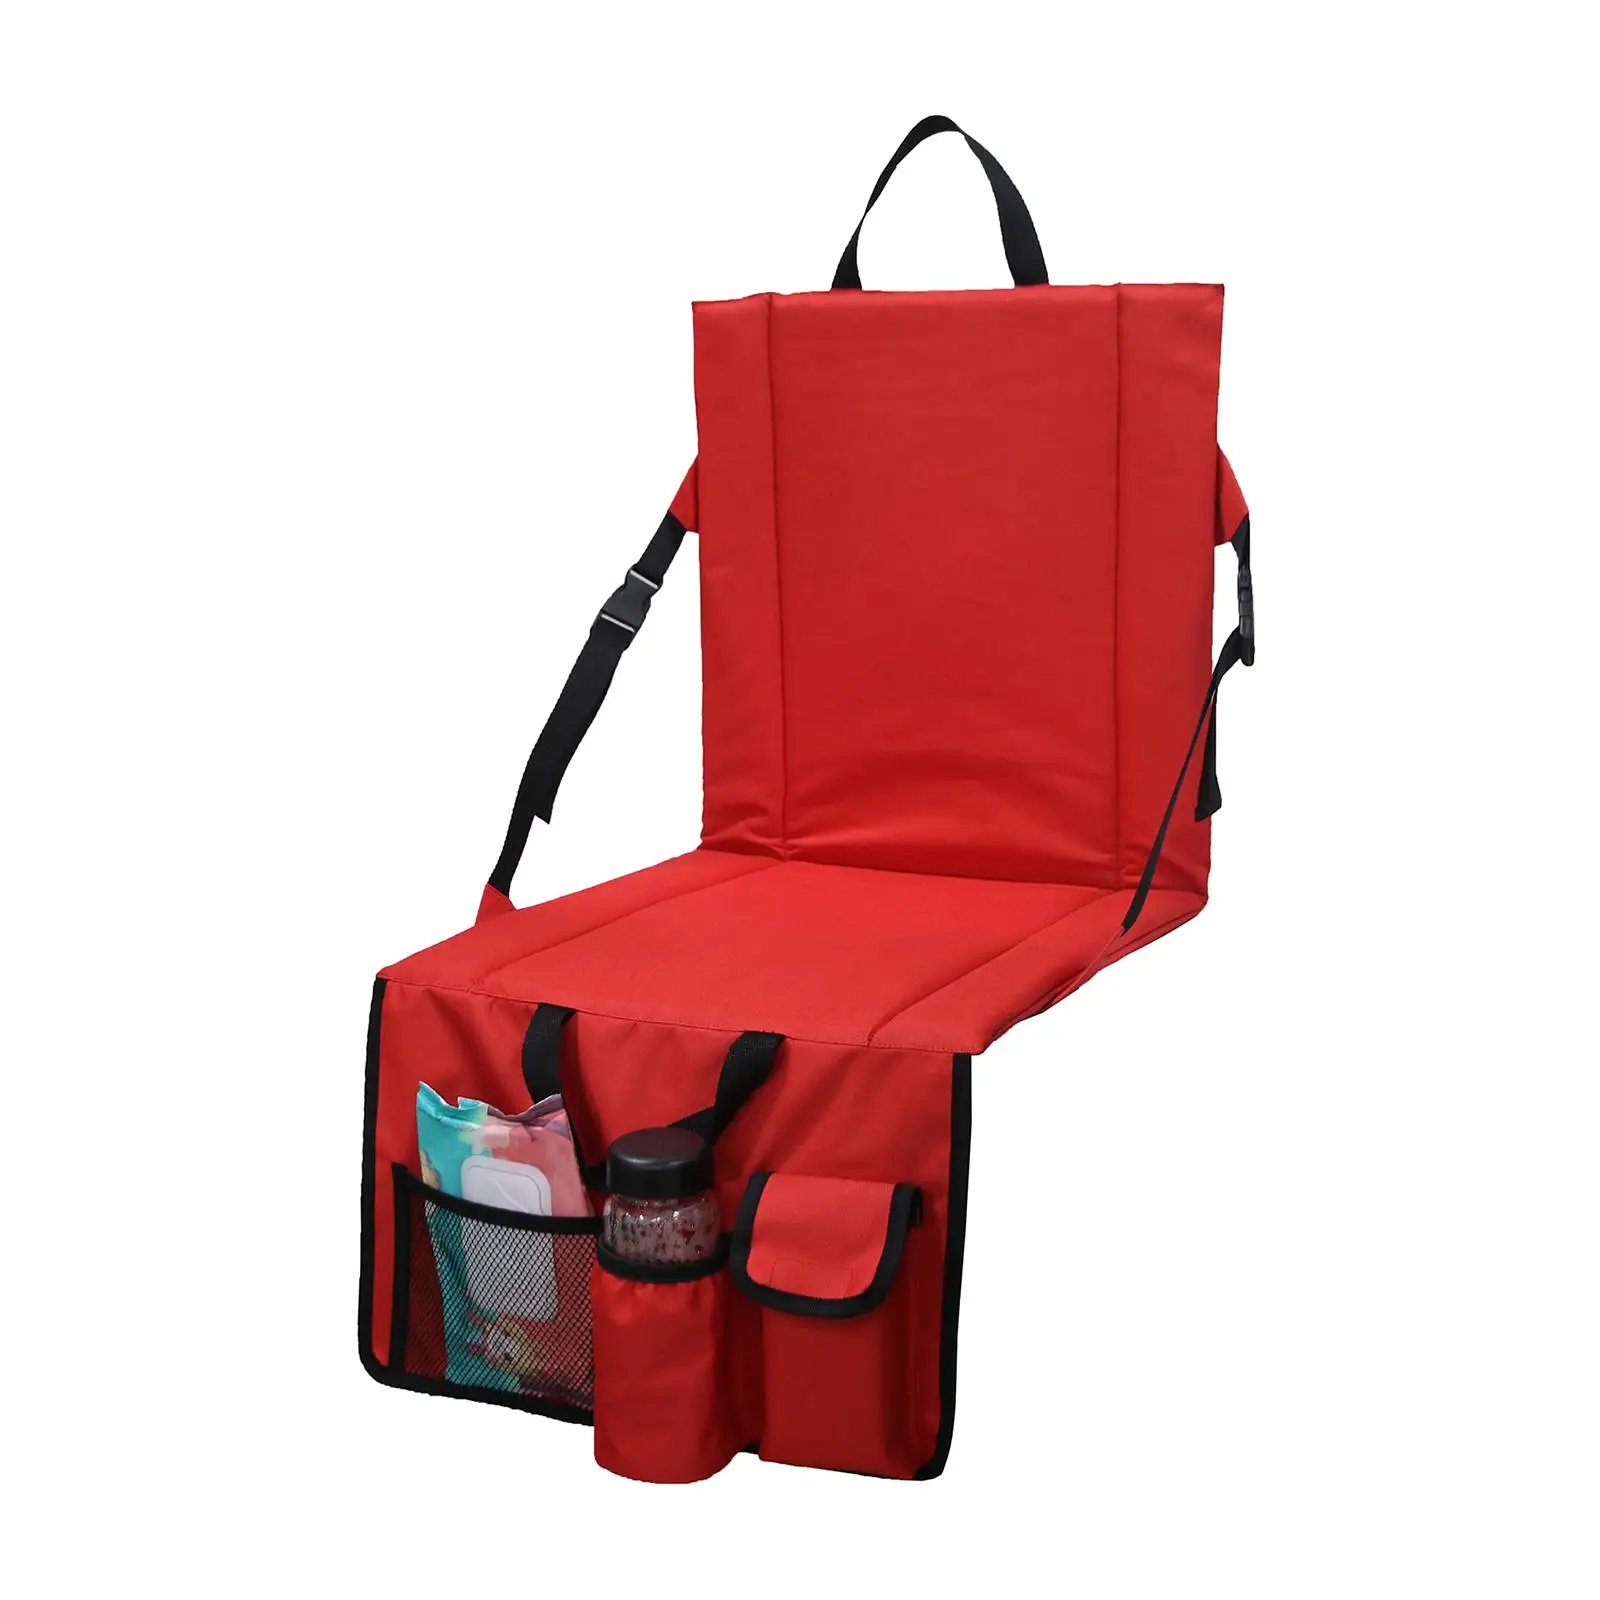 Folding Stadium Chair with Pocket Cushion Adjustable Sit Mat Oxford Cloth Cup Holder for Camping Beach Picnic Backpacking Travel